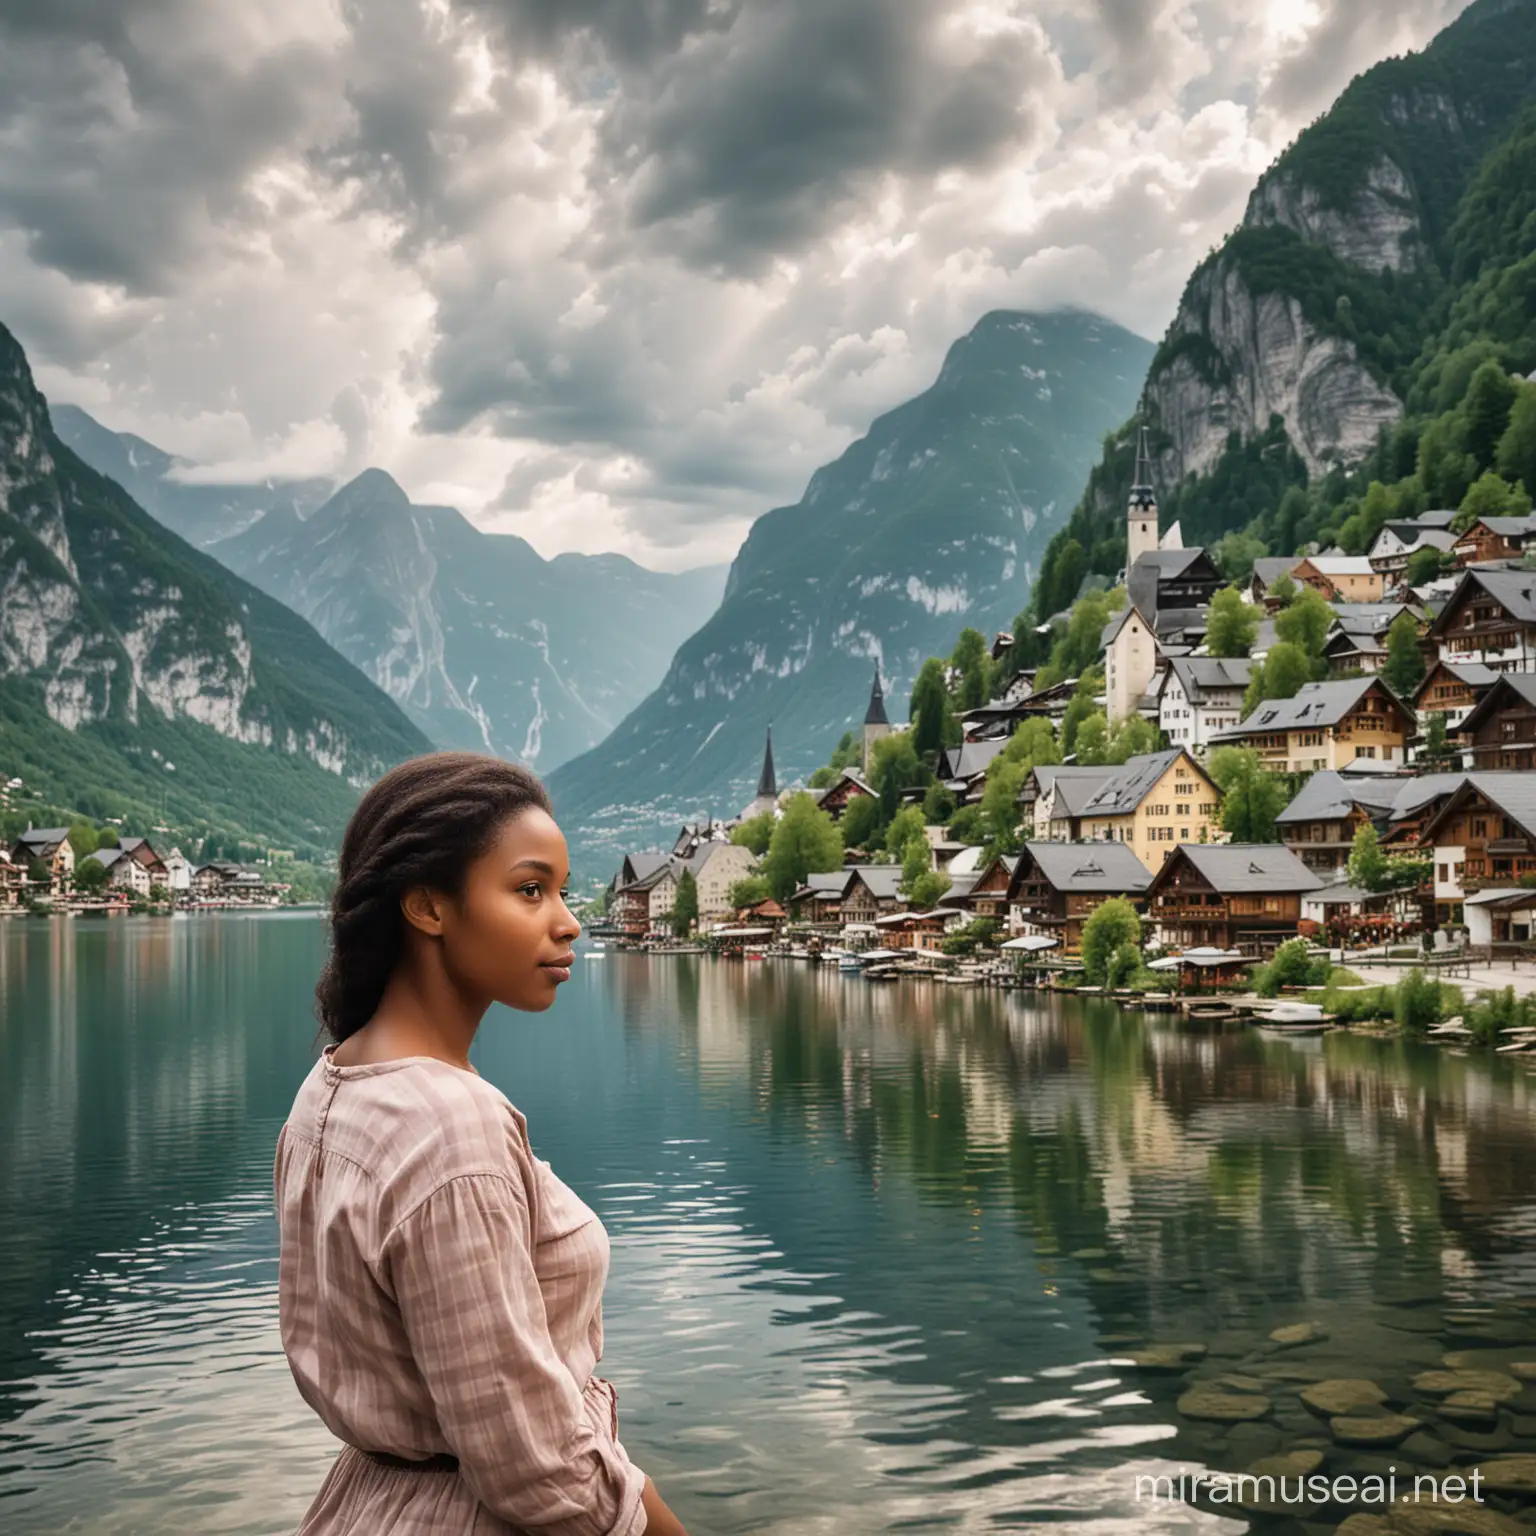 The image shows a town next to a body of water with Hallstatt in the background. It features a scenic landscape with trees, mountains, and houses near the shore of a lake. The sky is cloudy, adding to the peaceful and tranquil setting.,Beautiful Black woman The woman's body parts such as chest, thigh, stomach, and abdomen are visible.